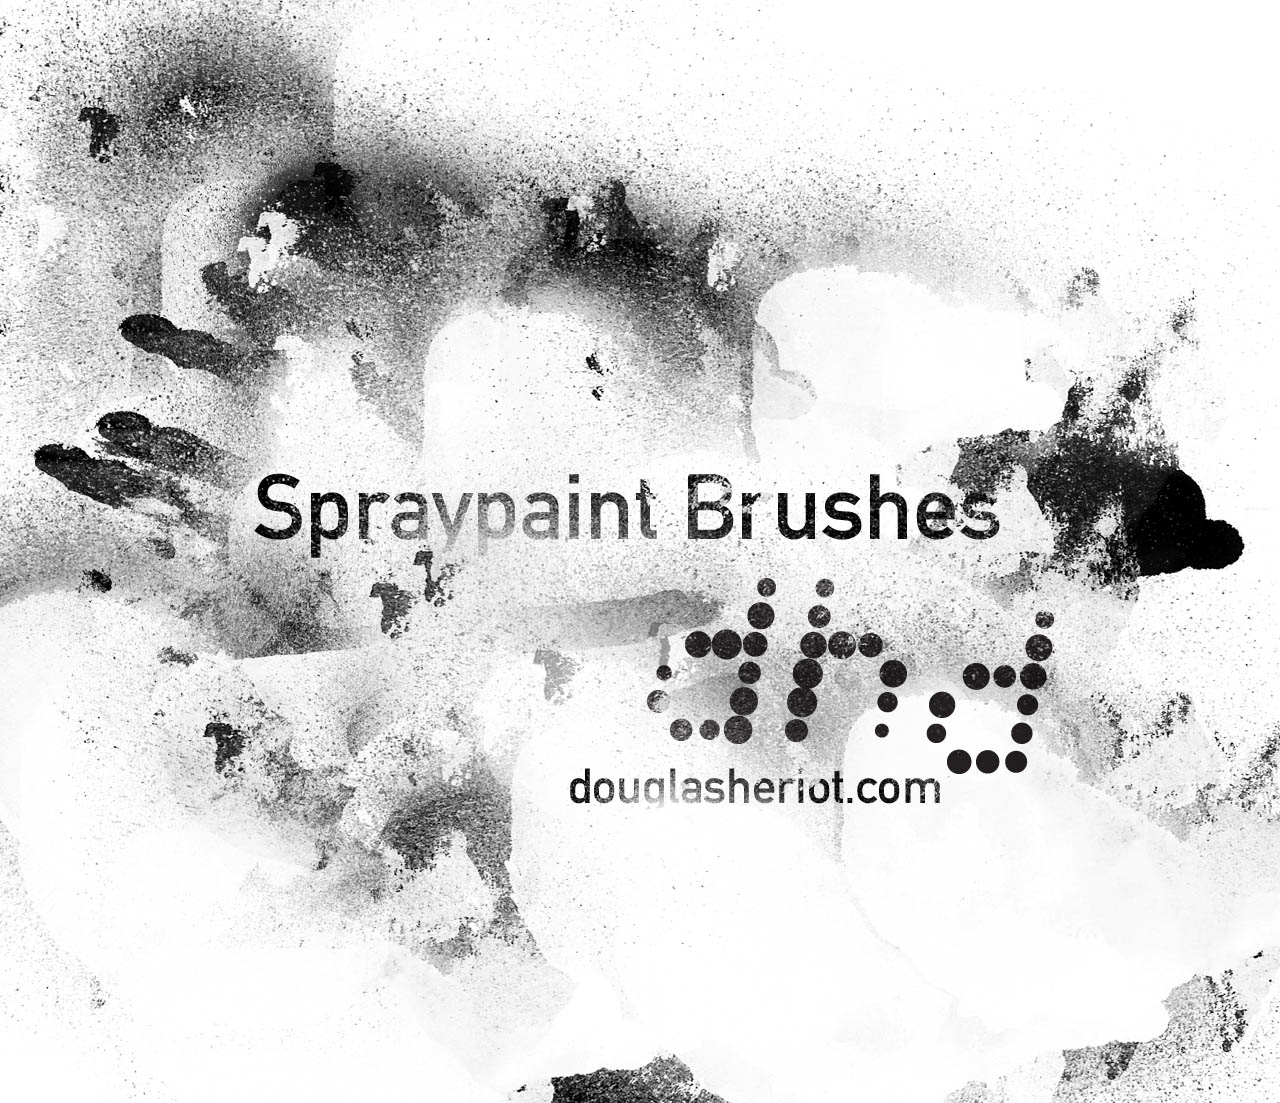 Spraypaint Photoshop Brushes by Douglas Heriot